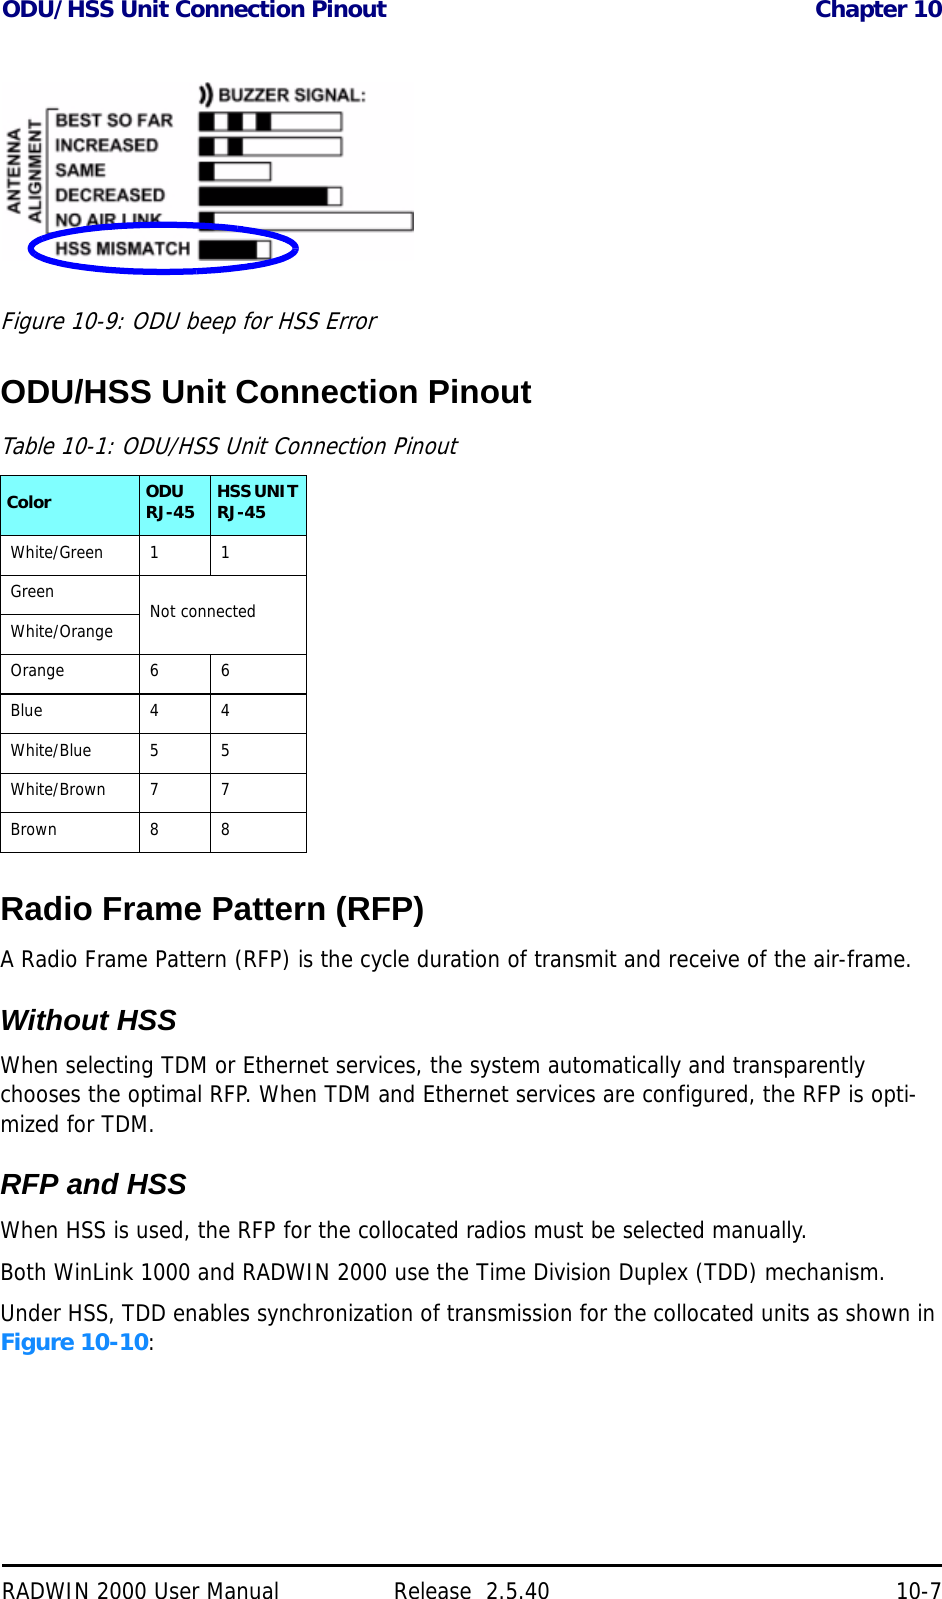 ODU/HSS Unit Connection Pinout Chapter 10RADWIN 2000 User Manual Release  2.5.40 10-7Figure 10-9: ODU beep for HSS ErrorODU/HSS Unit Connection PinoutRadio Frame Pattern (RFP)A Radio Frame Pattern (RFP) is the cycle duration of transmit and receive of the air-frame.Without HSSWhen selecting TDM or Ethernet services, the system automatically and transparently chooses the optimal RFP. When TDM and Ethernet services are configured, the RFP is opti-mized for TDM.RFP and HSSWhen HSS is used, the RFP for the collocated radios must be selected manually.Both WinLink 1000 and RADWIN 2000 use the Time Division Duplex (TDD) mechanism.Under HSS, TDD enables synchronization of transmission for the collocated units as shown in Figure 10-10:Table 10-1: ODU/HSS Unit Connection PinoutColor ODU RJ-45 HSS UNIT RJ-45White/Green 1 1 Green Not connectedWhite/OrangeOrange 6 6 Blue 4 4 White/Blue 5 5 White/Brown 7 7 Brown 8 8 